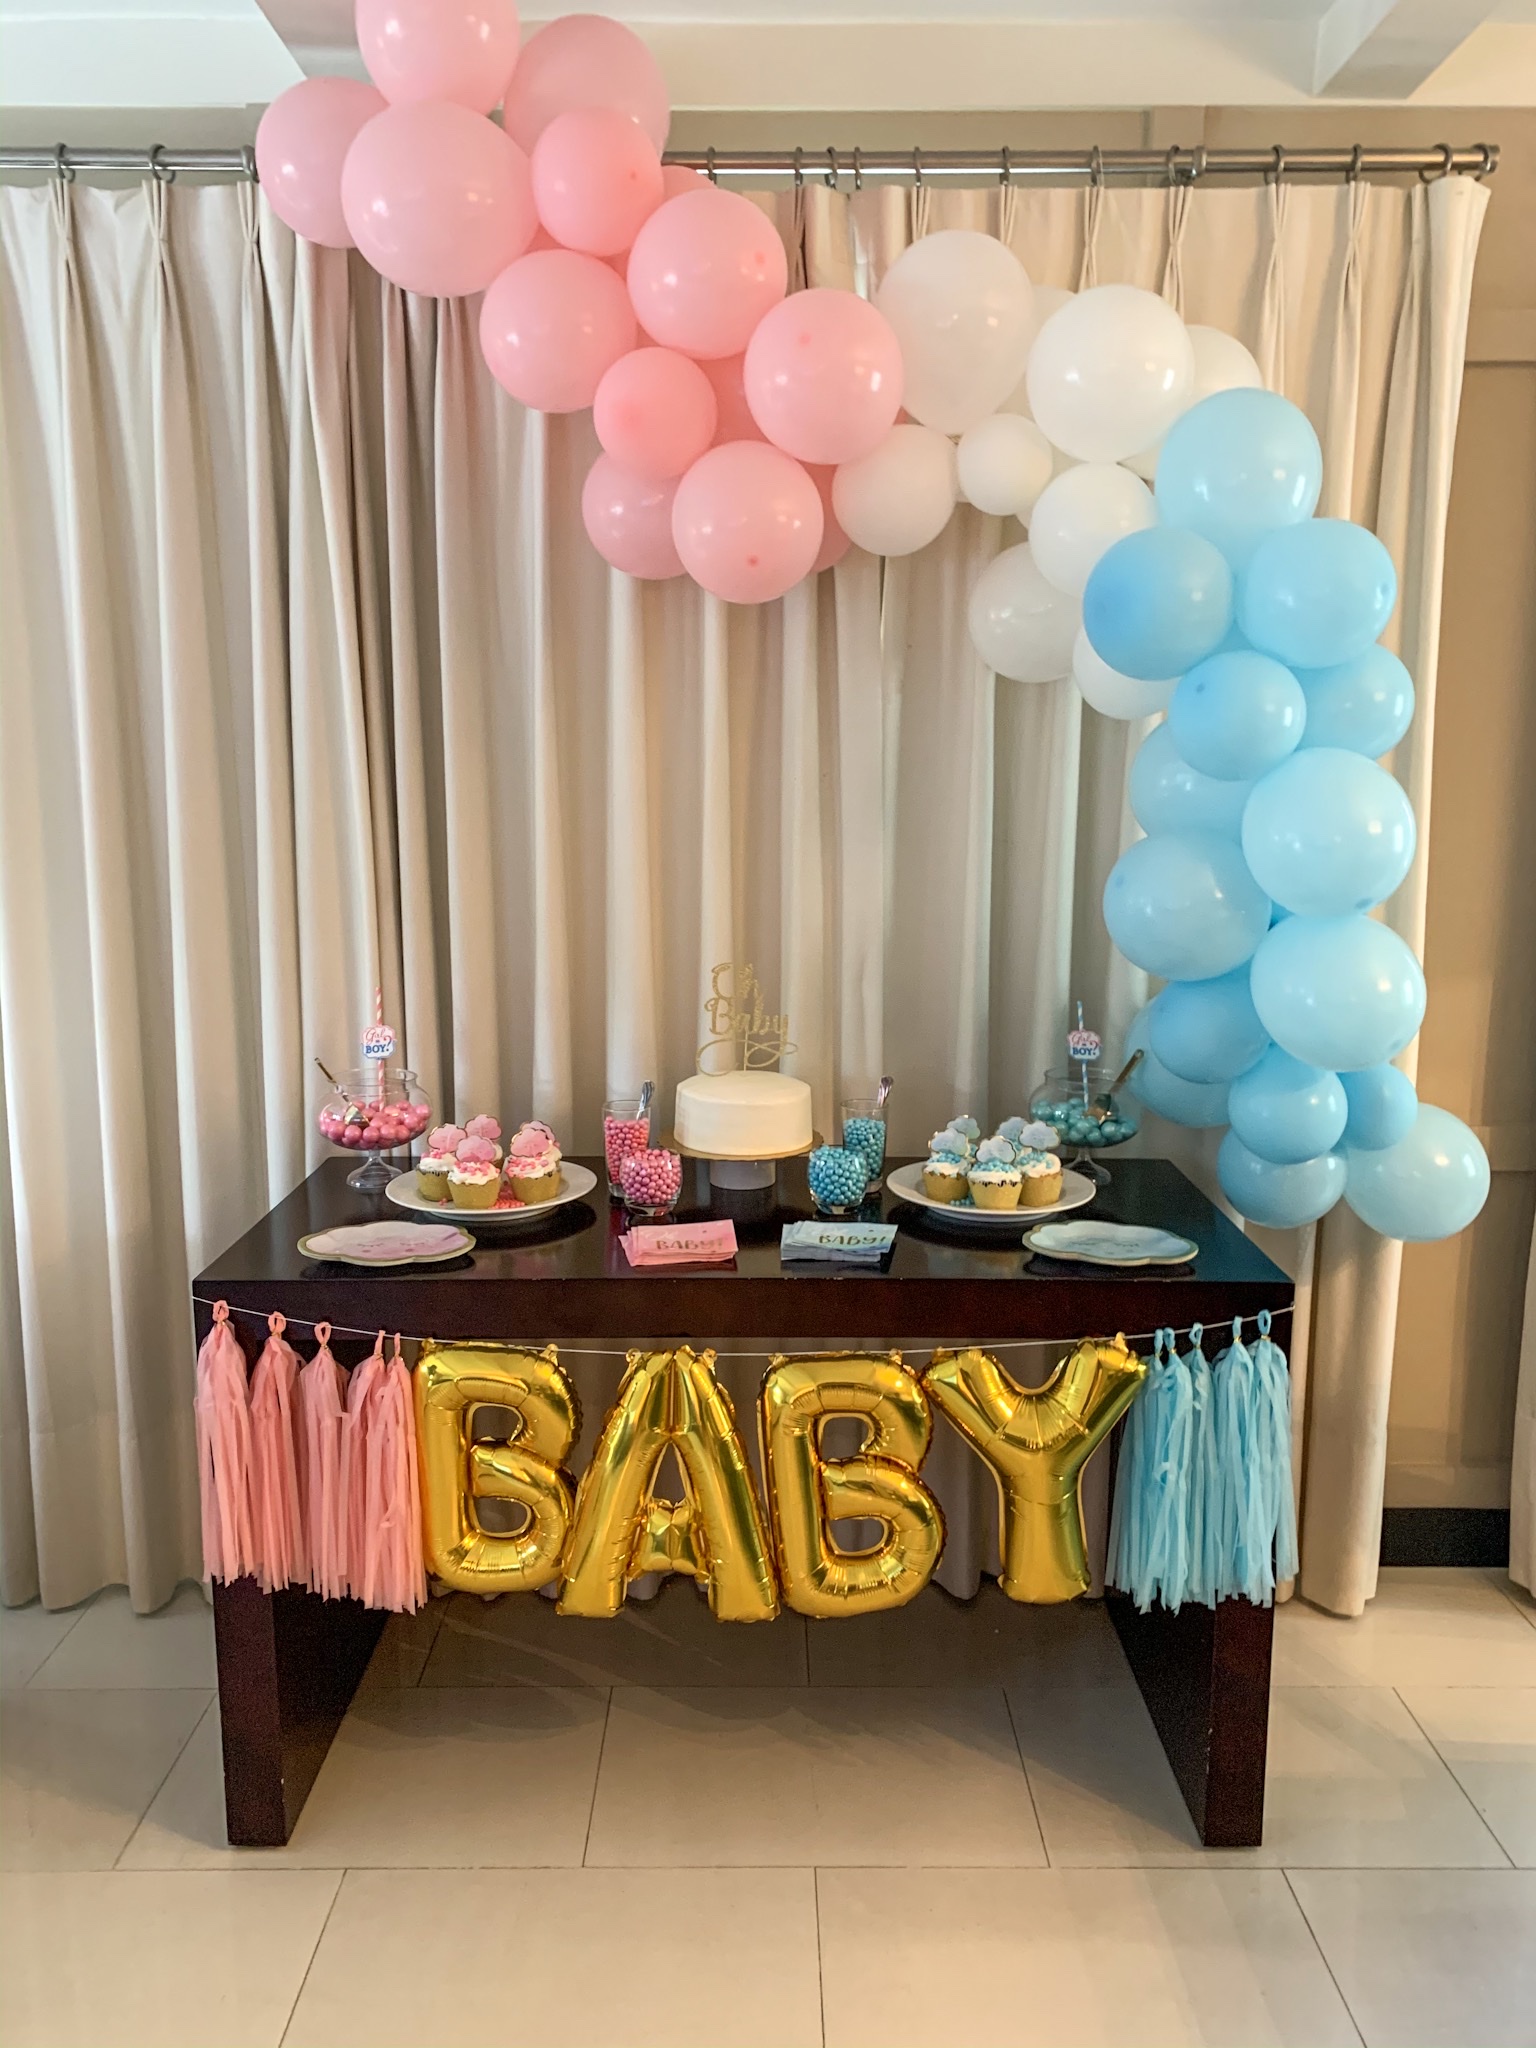 what is gender reveal party, a gender reveal party, what is gender reveal, gender announcement party, reveal party, how do gender reveal parties work, baby gender reveal